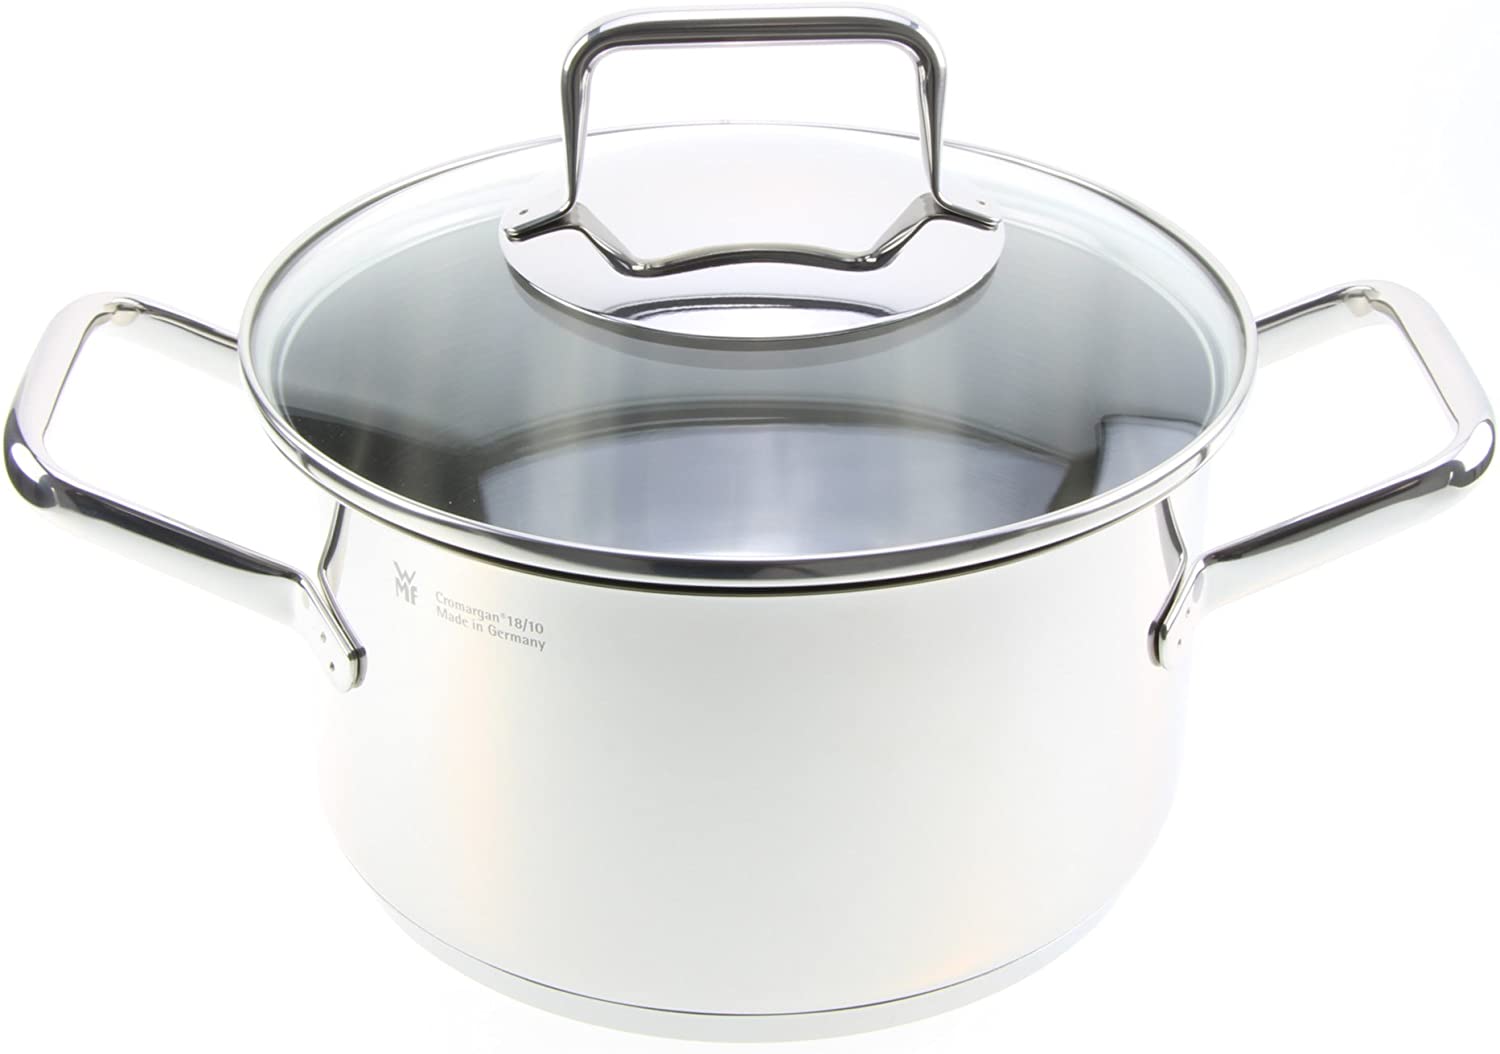 WMF Trend 0768146380 Cooking Pot Set of 4